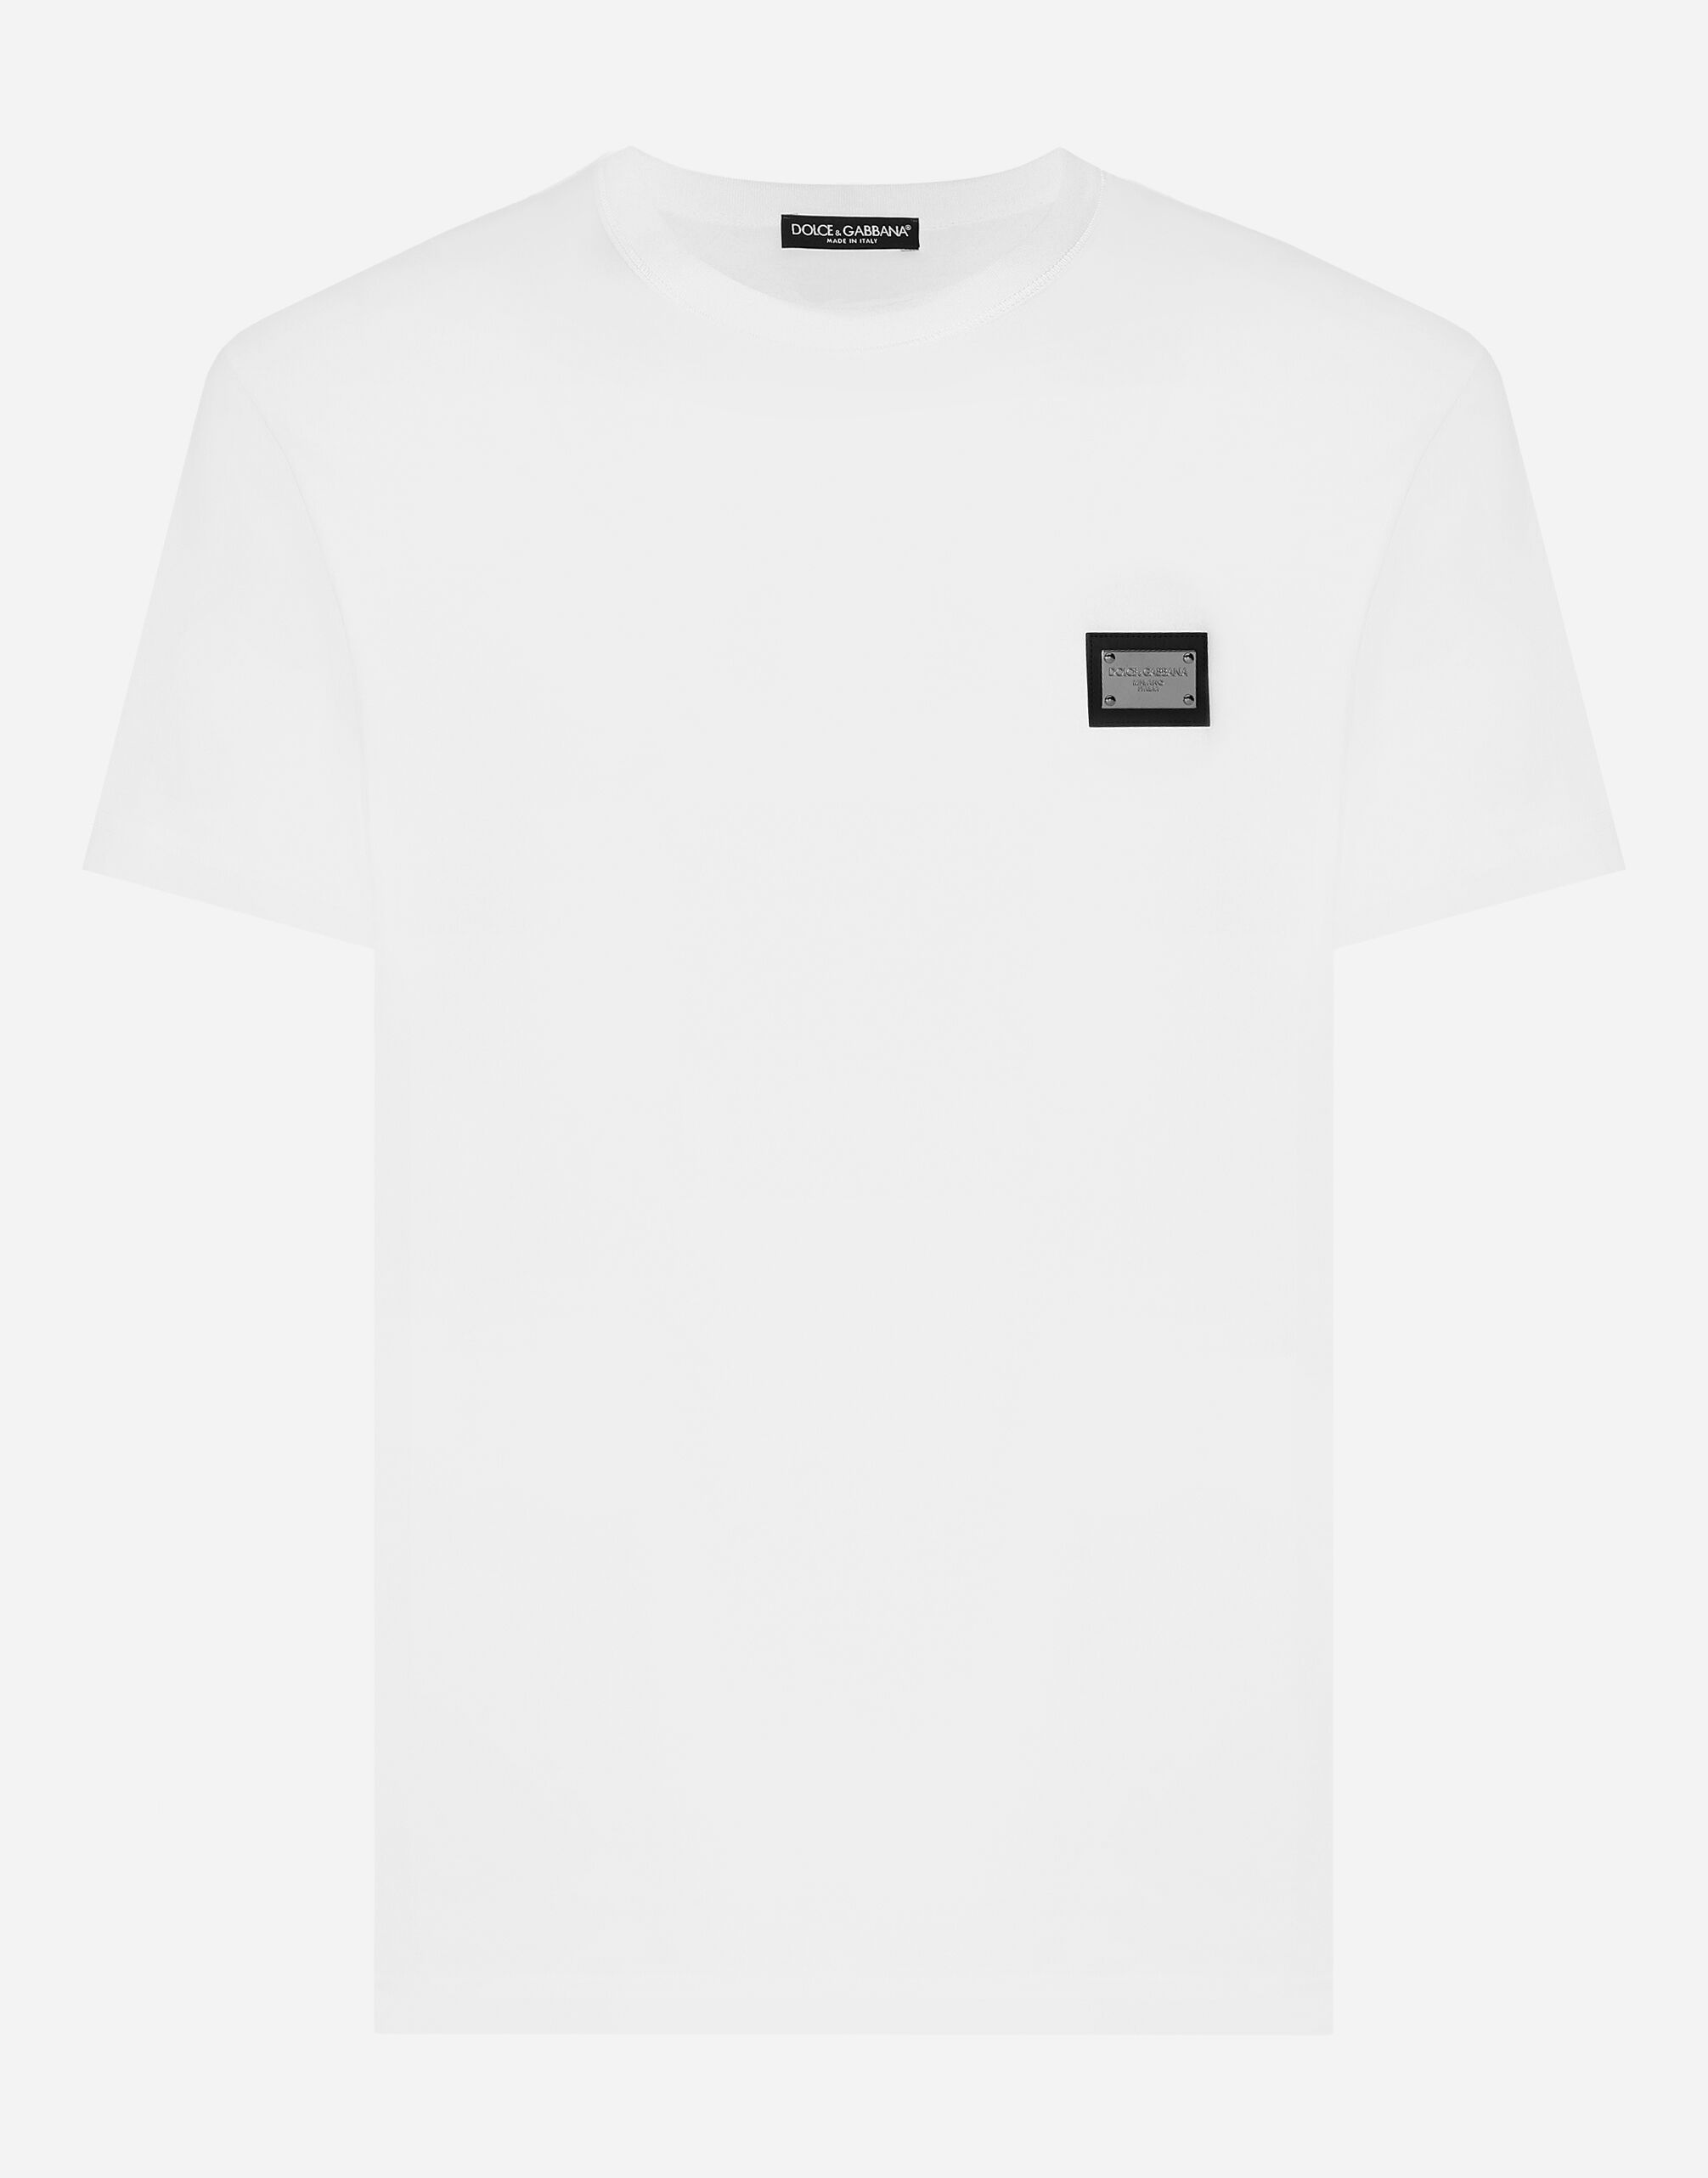 ${brand} Cotton T-shirt with branded tag ${colorDescription} ${masterID}